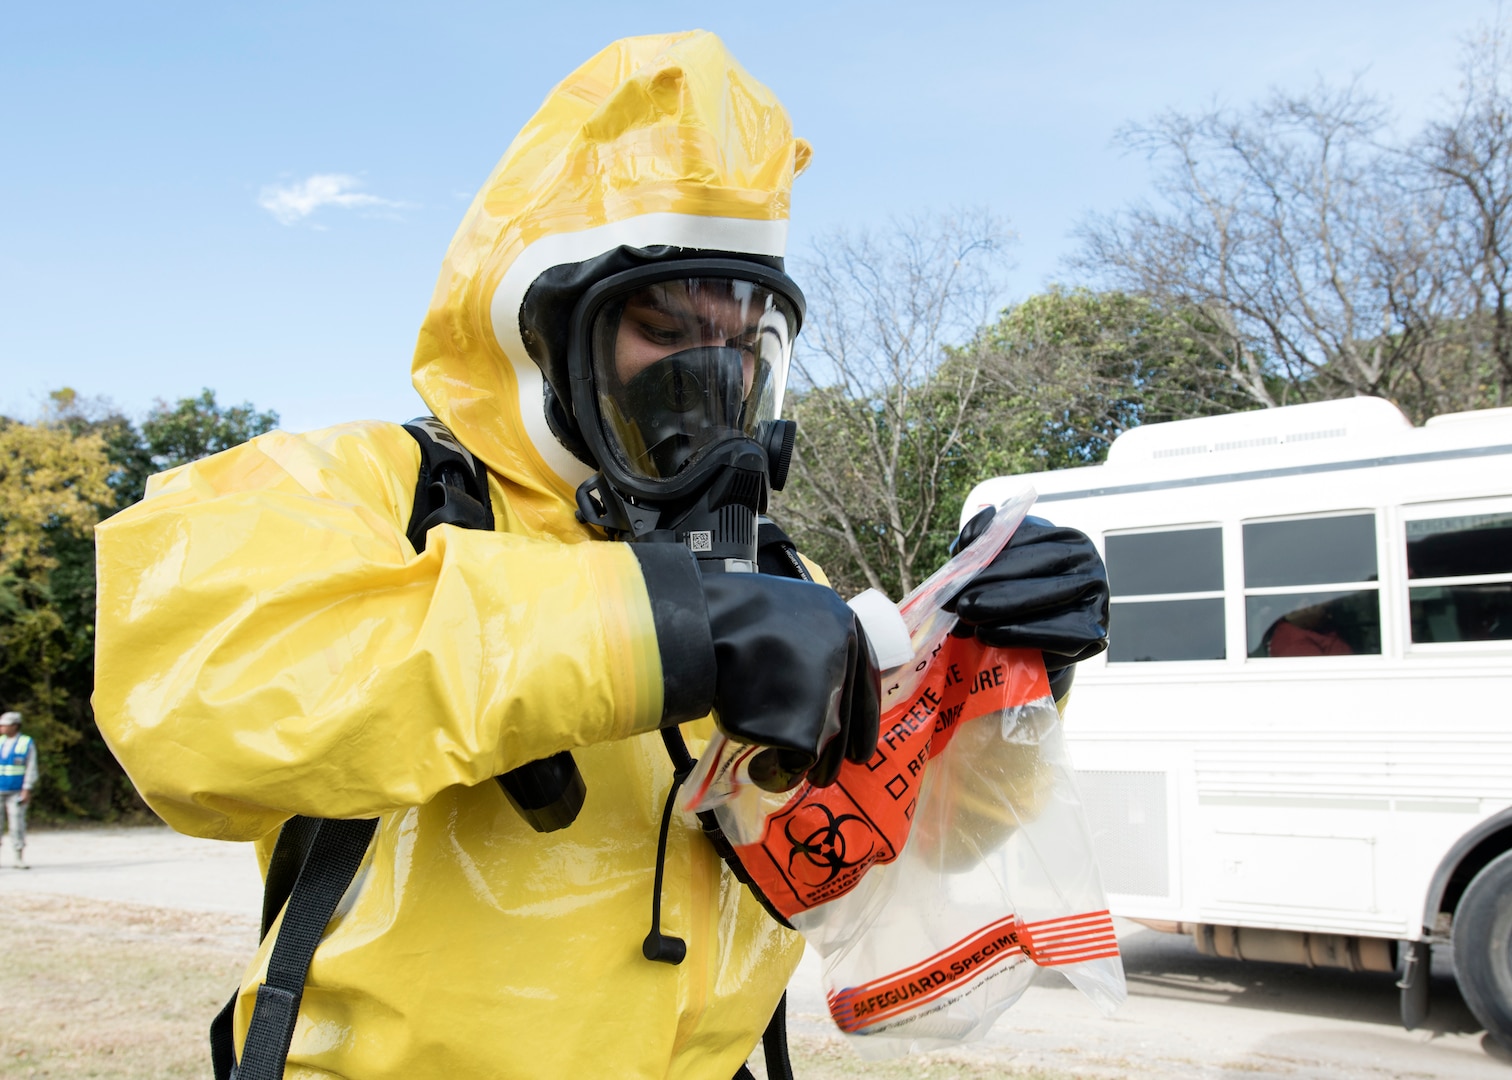 A bioenvironmental engineer from the 59th Medical Wing prepares a chemical sample for transfer during a MASCAL exercise on Joint Base San Antonio-Lackland, Texas. The chemical was tested to determine if it was toxic or non-toxic. (U.S. Air Force photo by Staff Sgt. Kevin Iinuma)